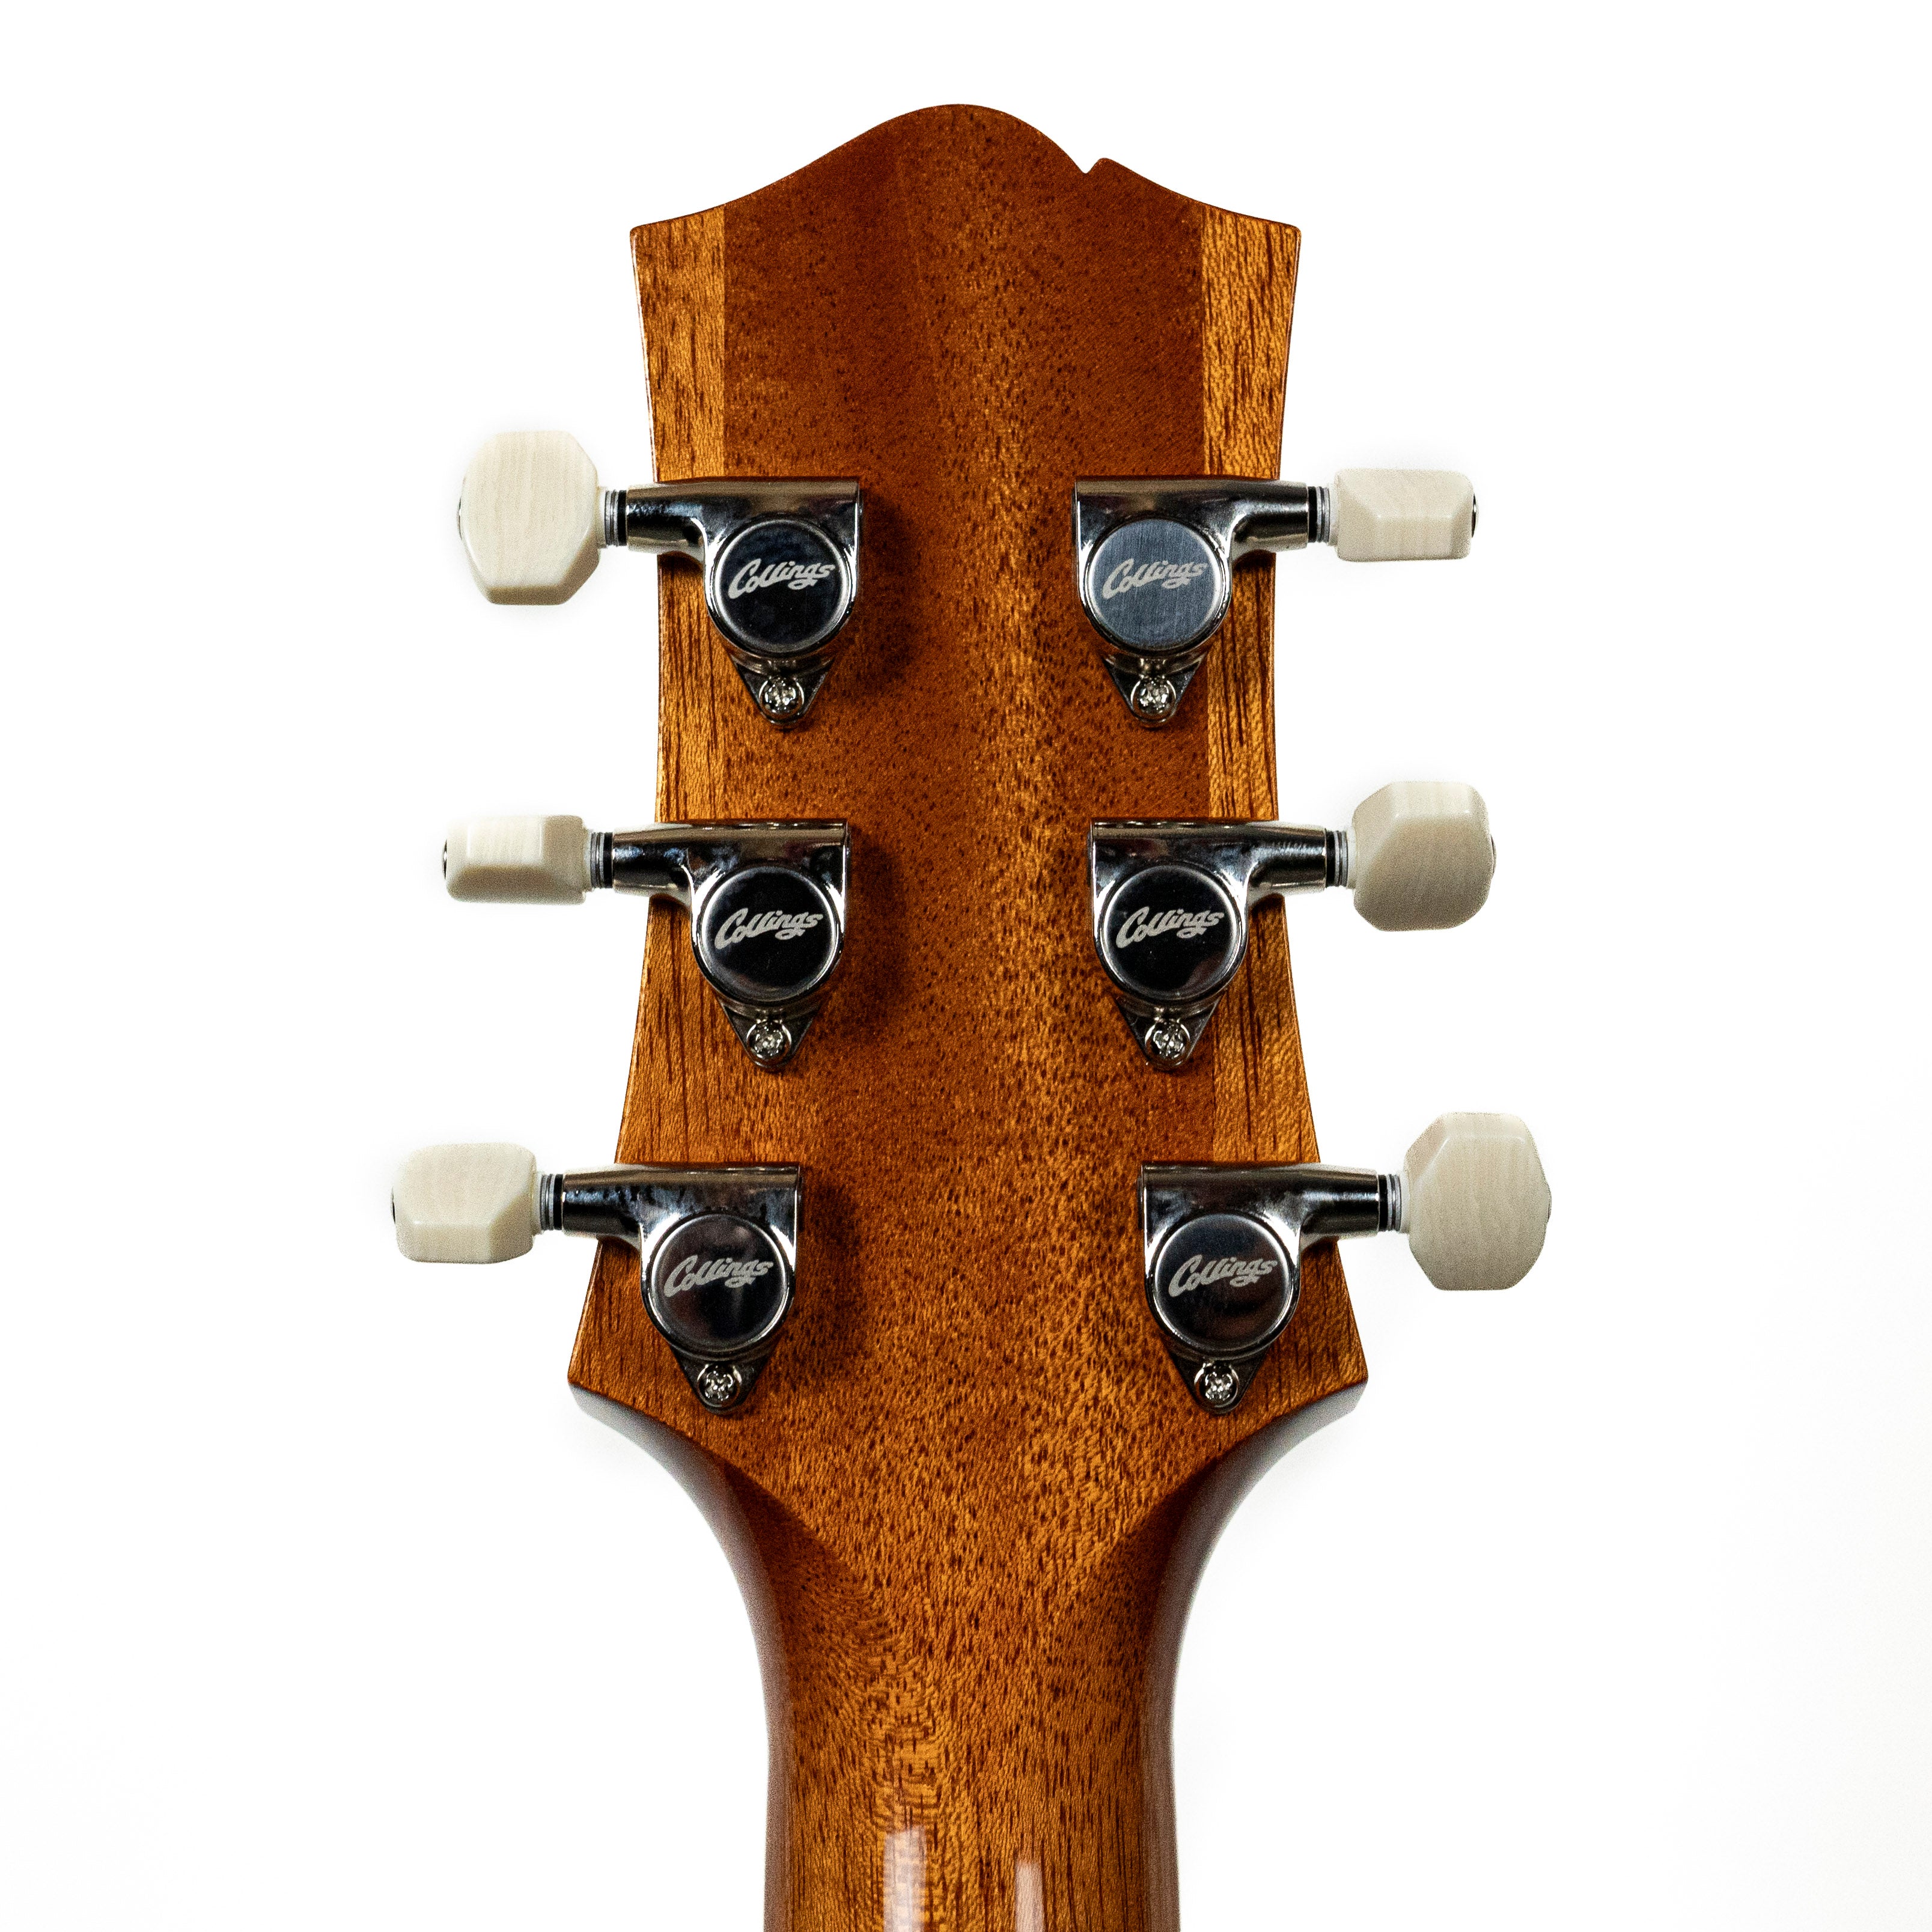 Collings I30 LC Blonde